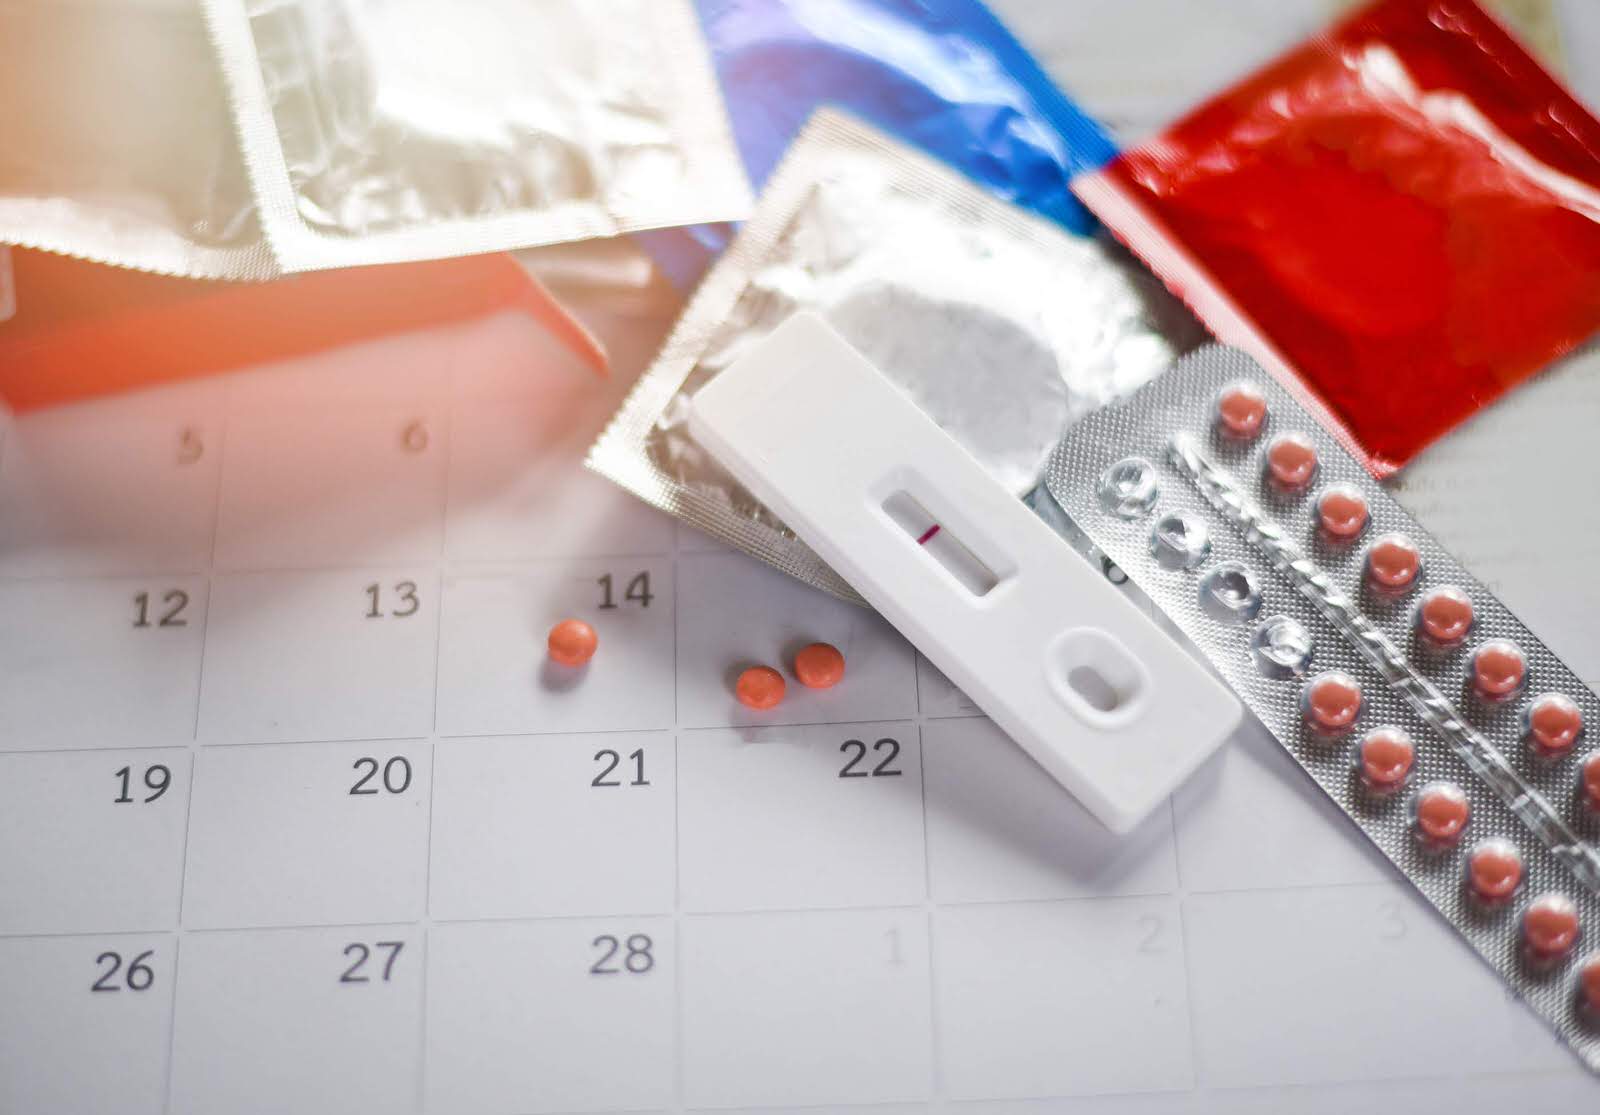 Methods of Oral Contraception